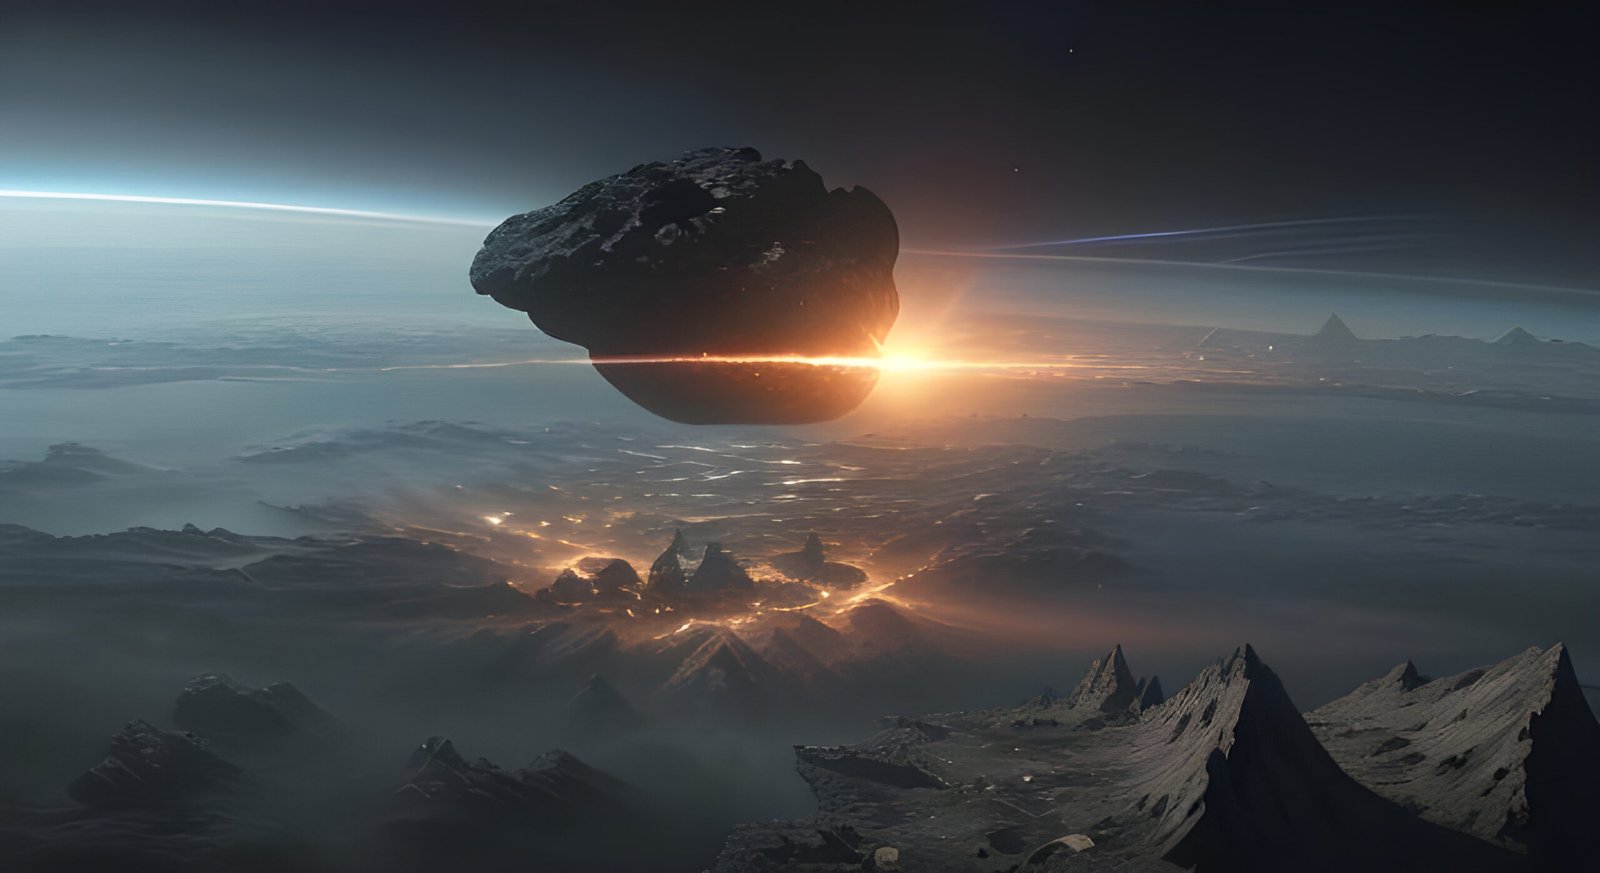 asteroid impacting planet